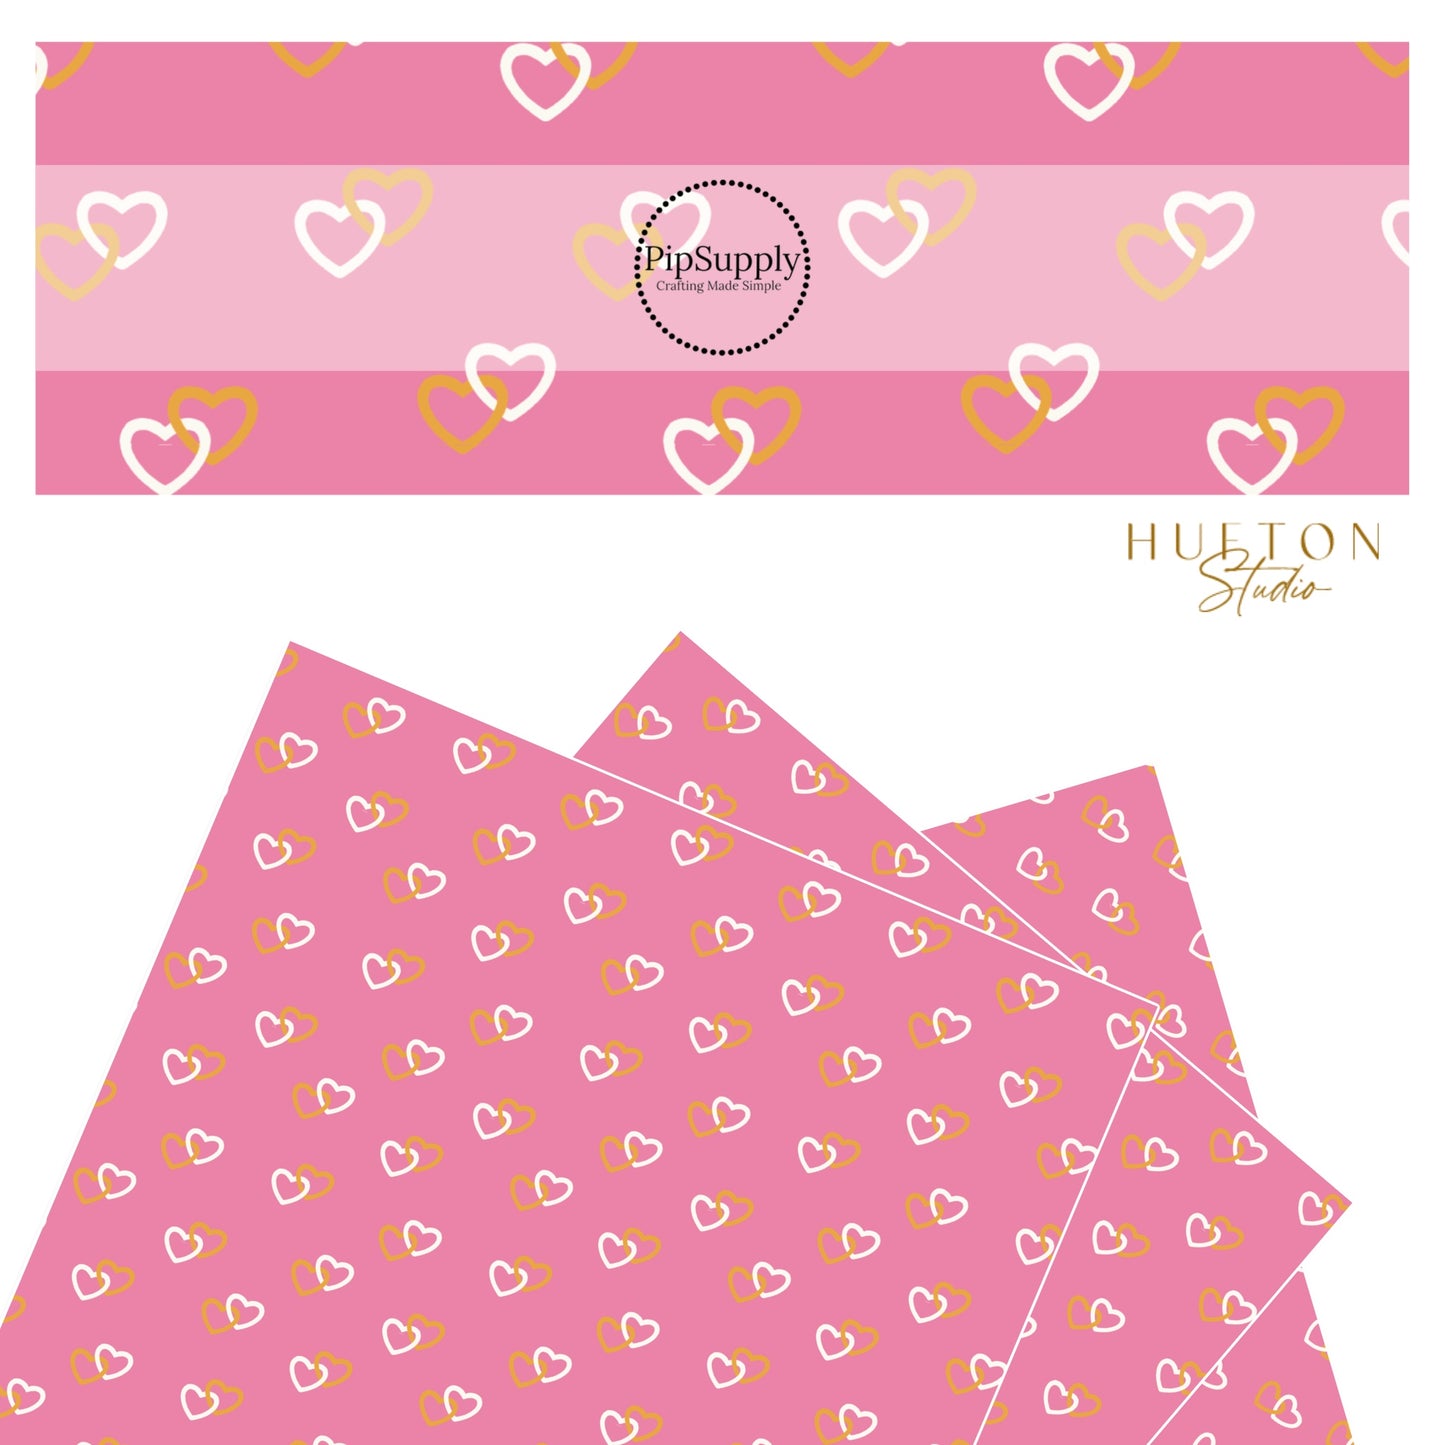 Golden orange hearts connected to white hearts on a pink faux leather sheet